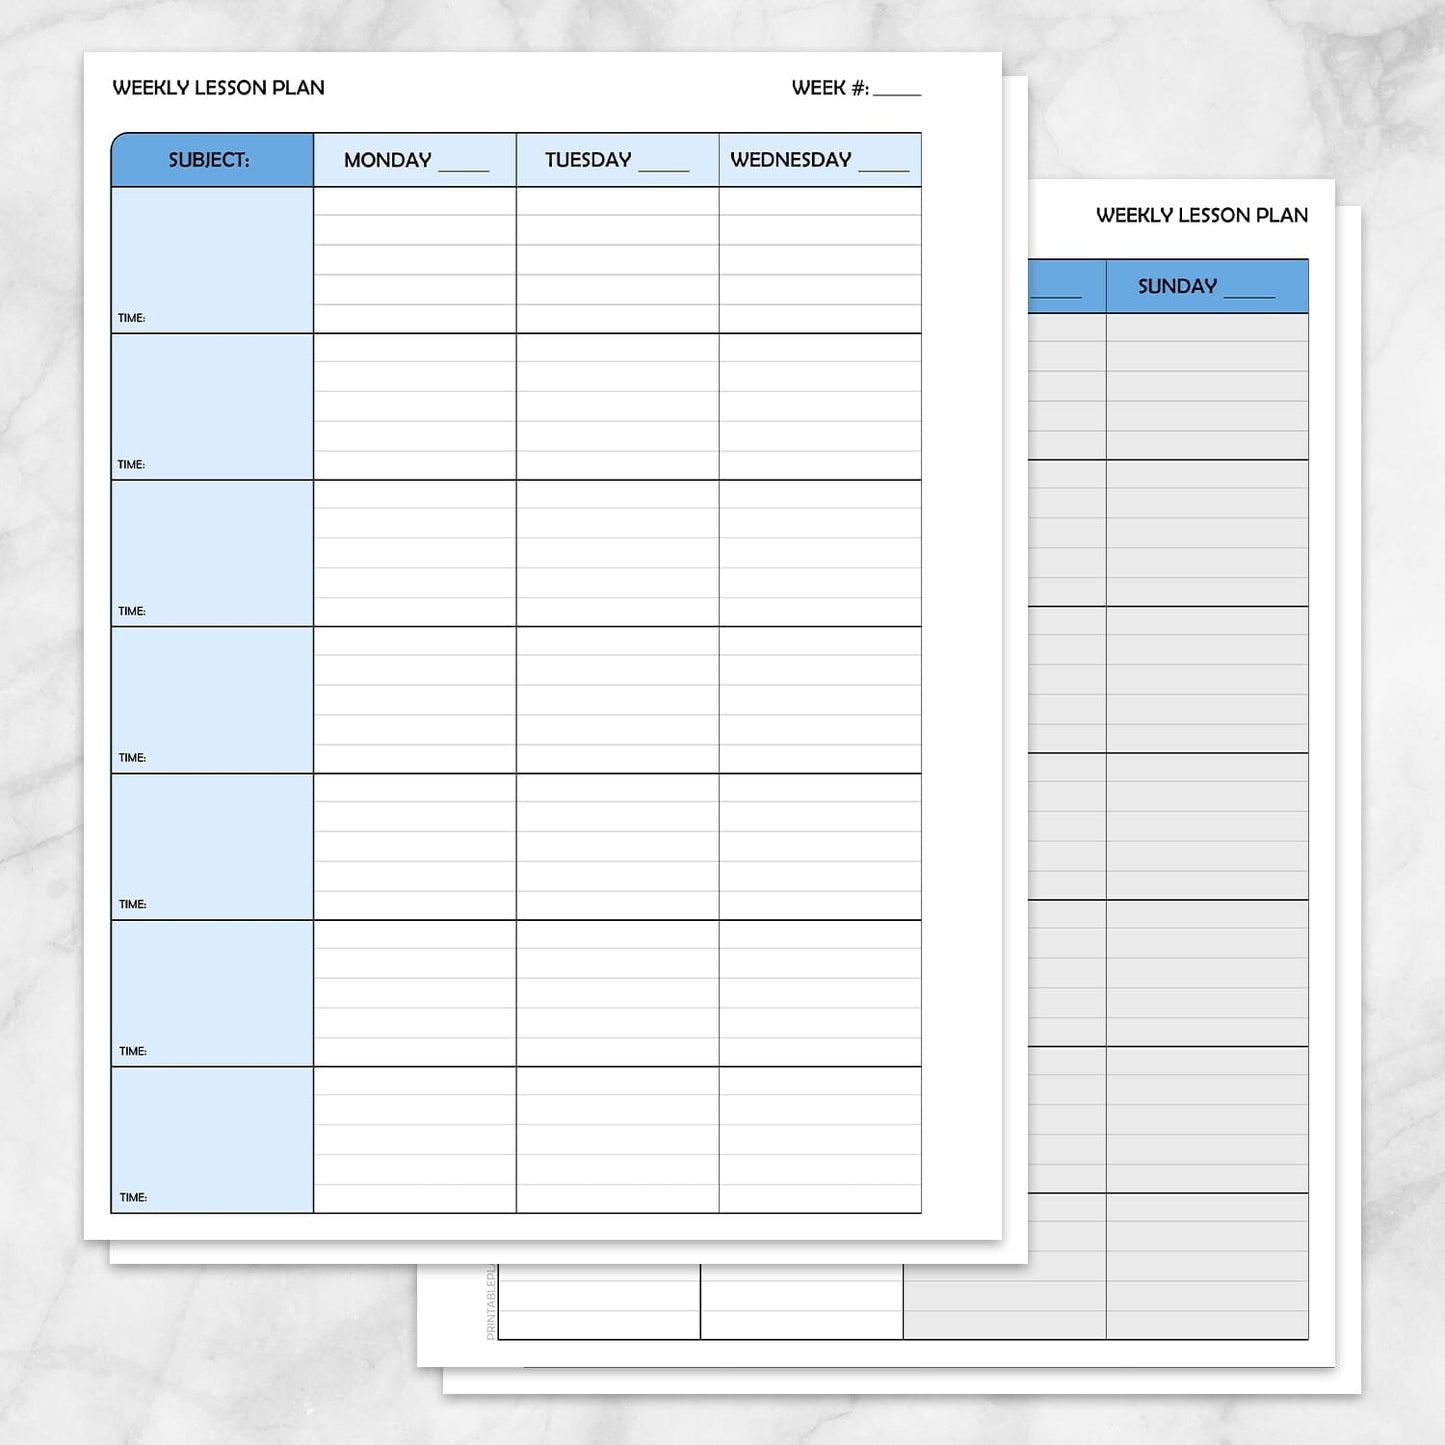 Printable Blue Weekly Lesson Plan for Teachers, School Planning Pages at Printable Planning.